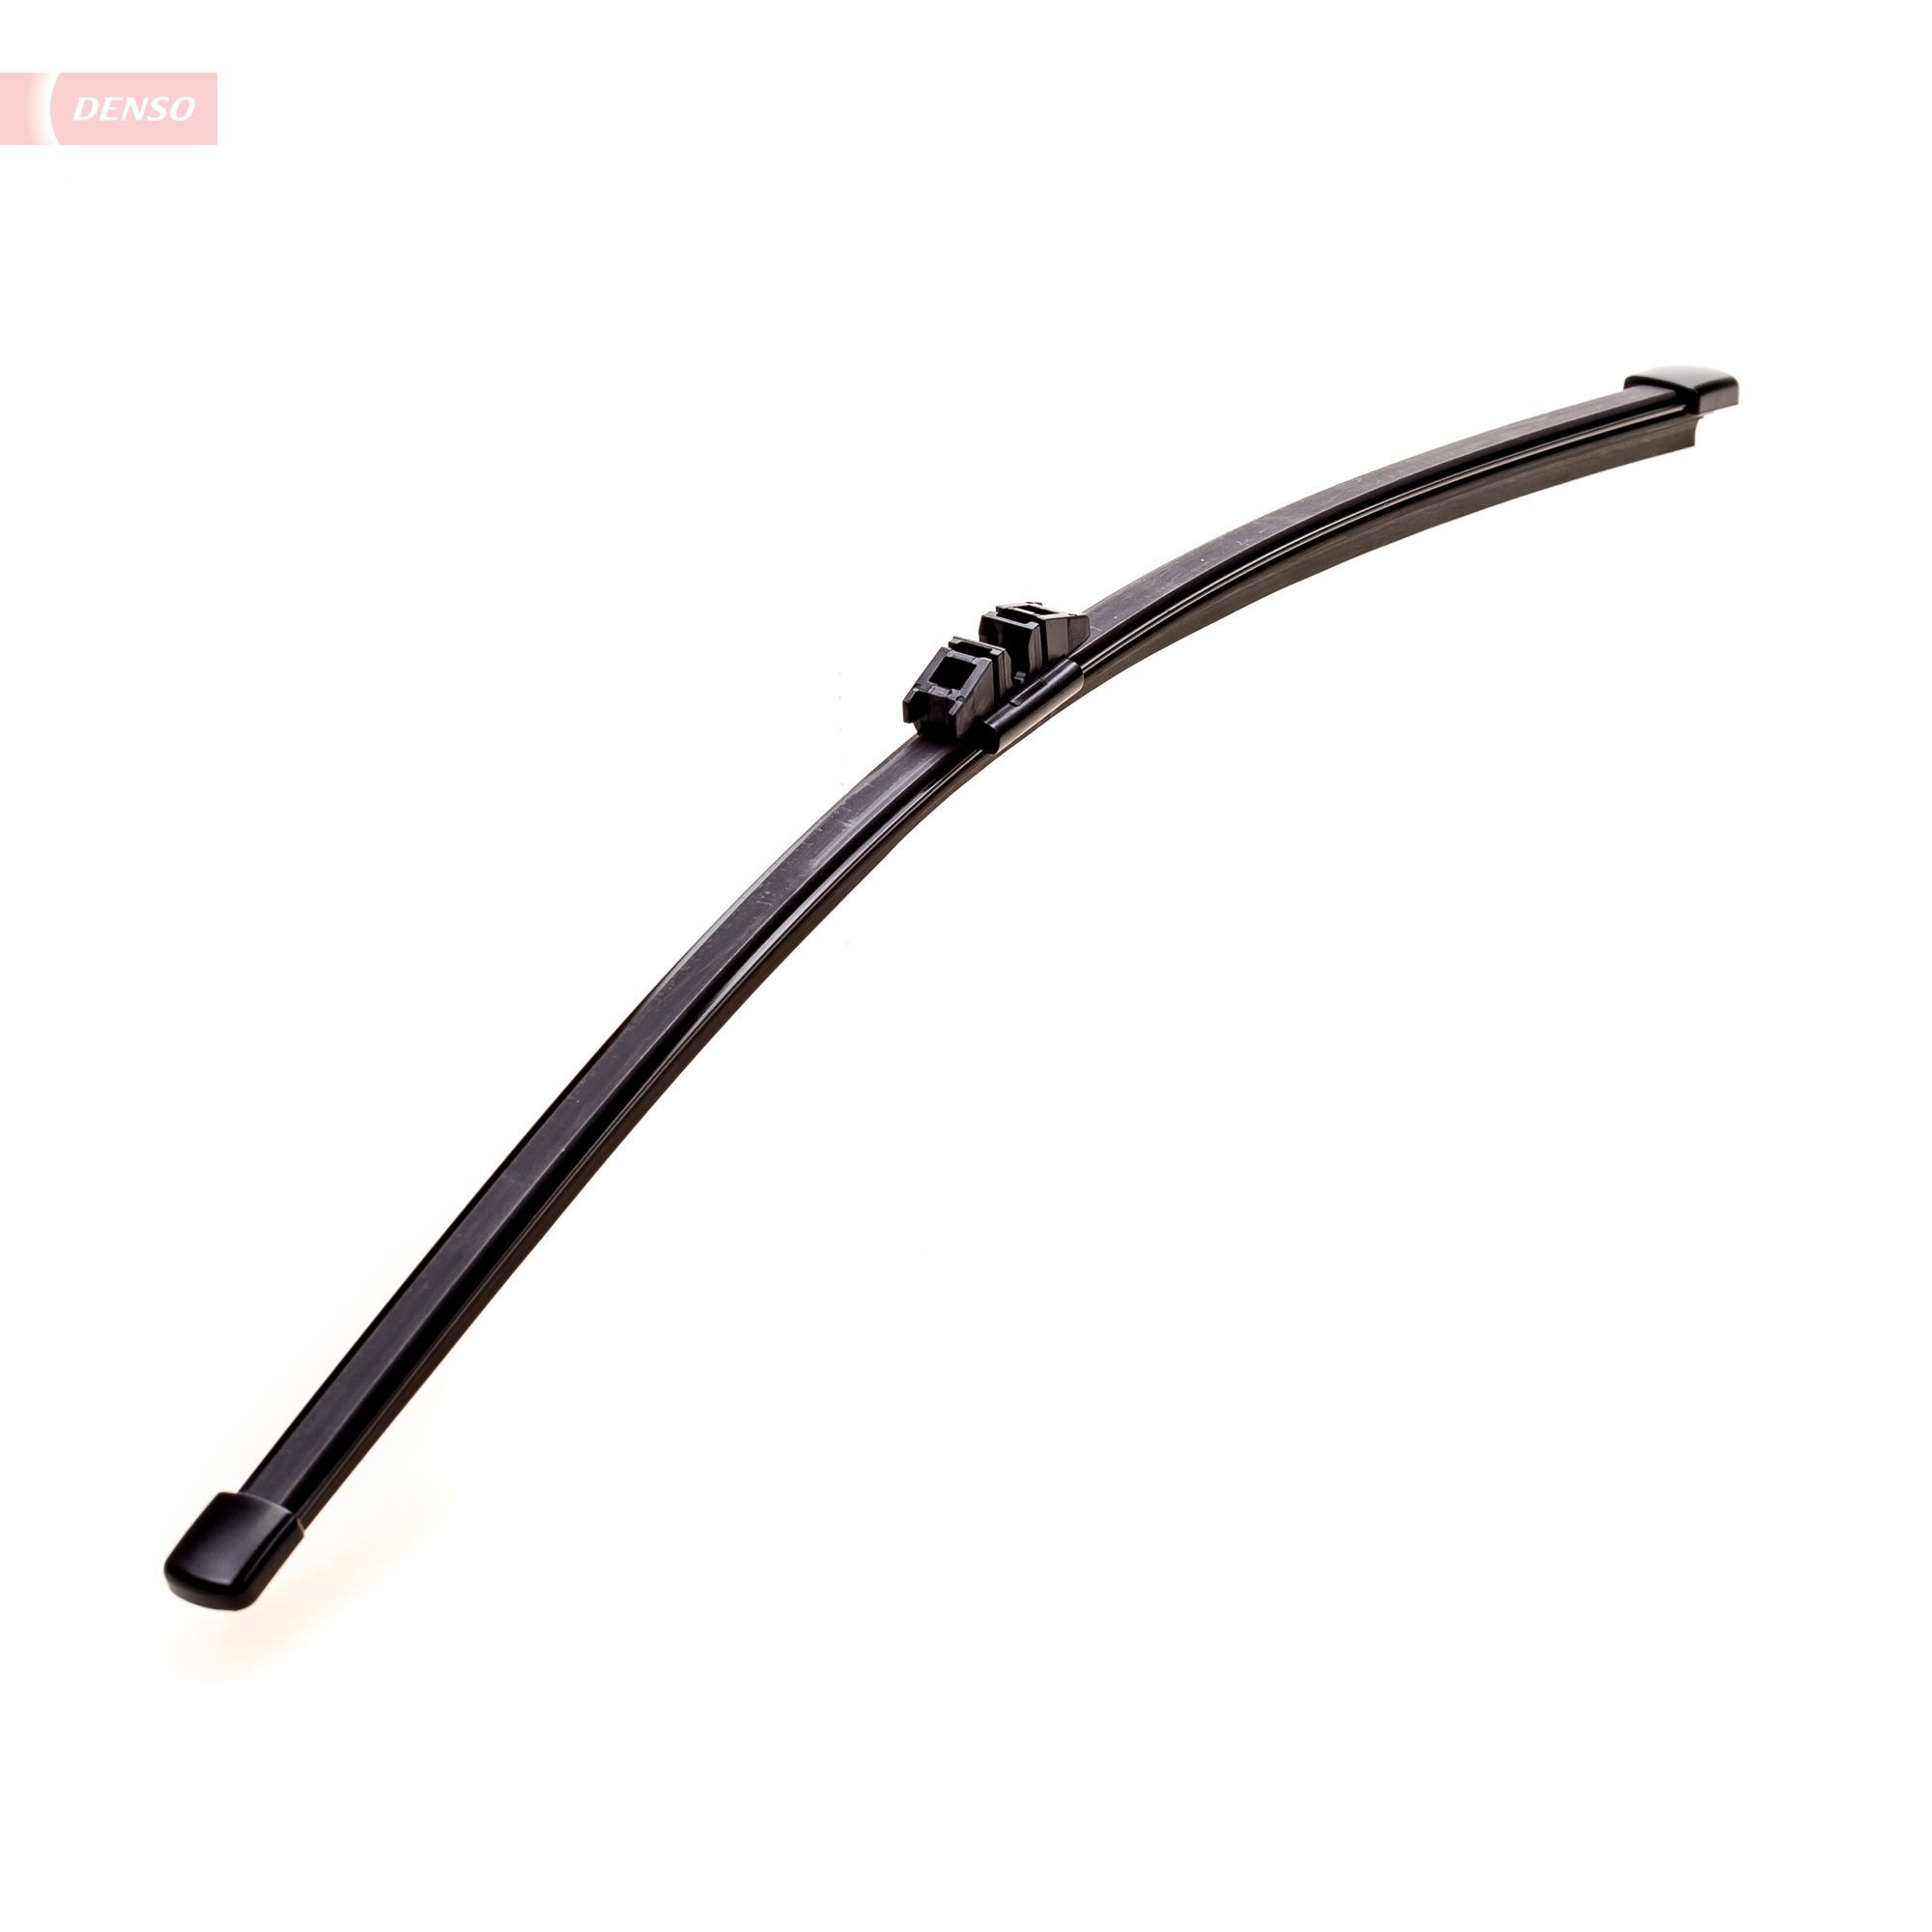 Original DENSO Windshield wipers DF-307 for BMW 1 Series